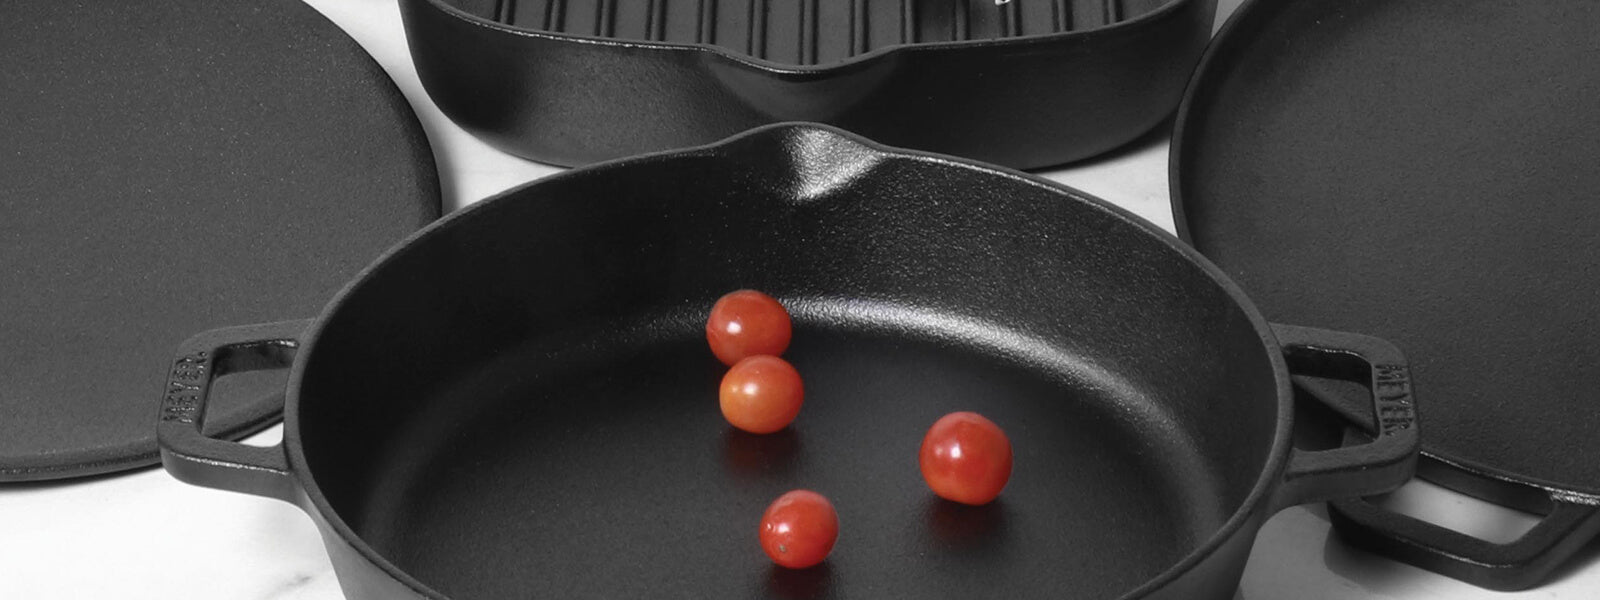 Is cast iron superior to other cookware? Discover best cookware material in India